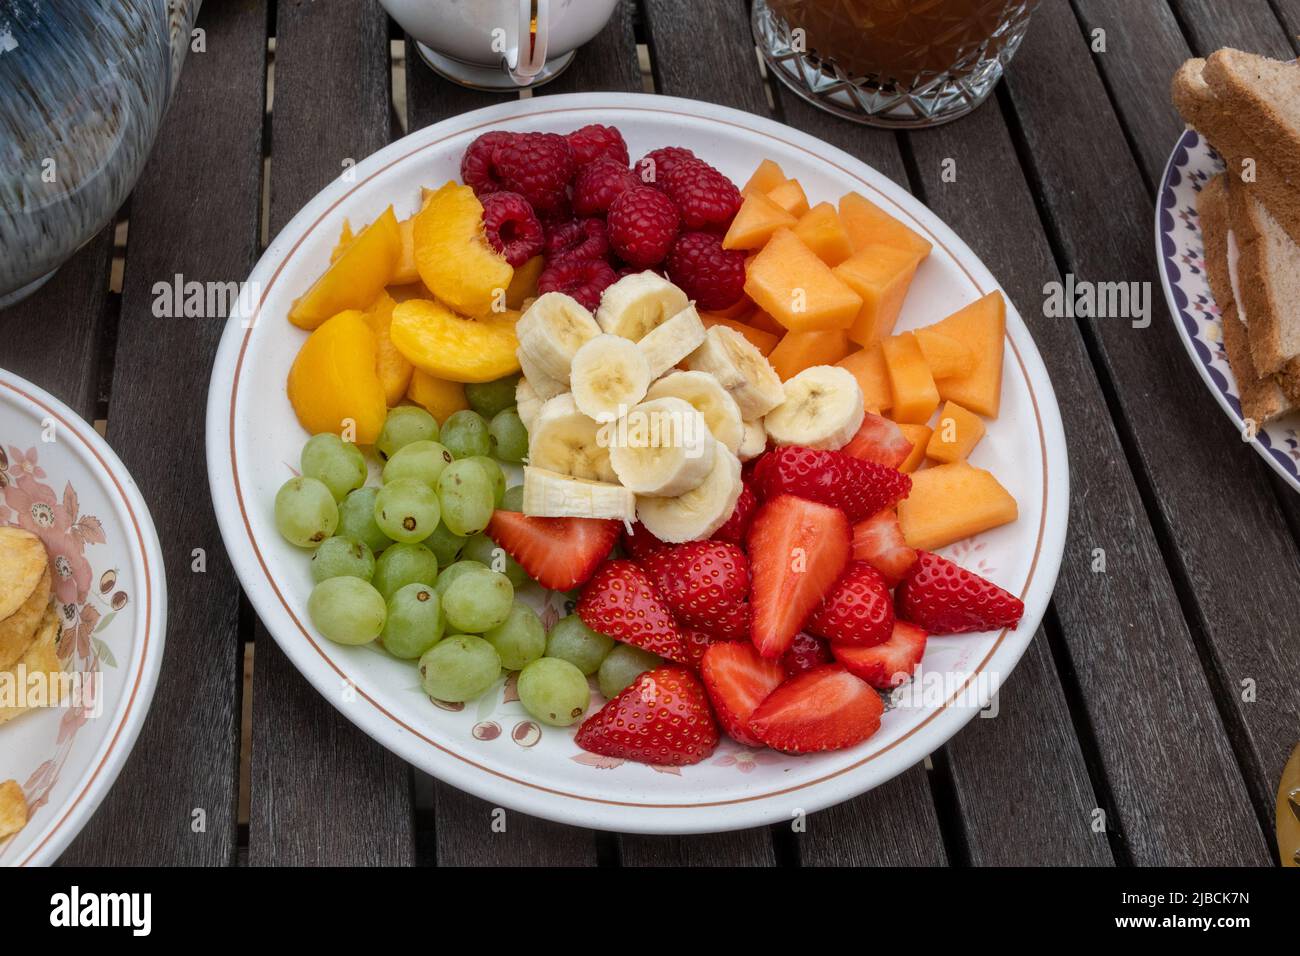 Variety of fruit cut up on a plate for a platinum jubilee family party, UK, June 2022 Stock Photo